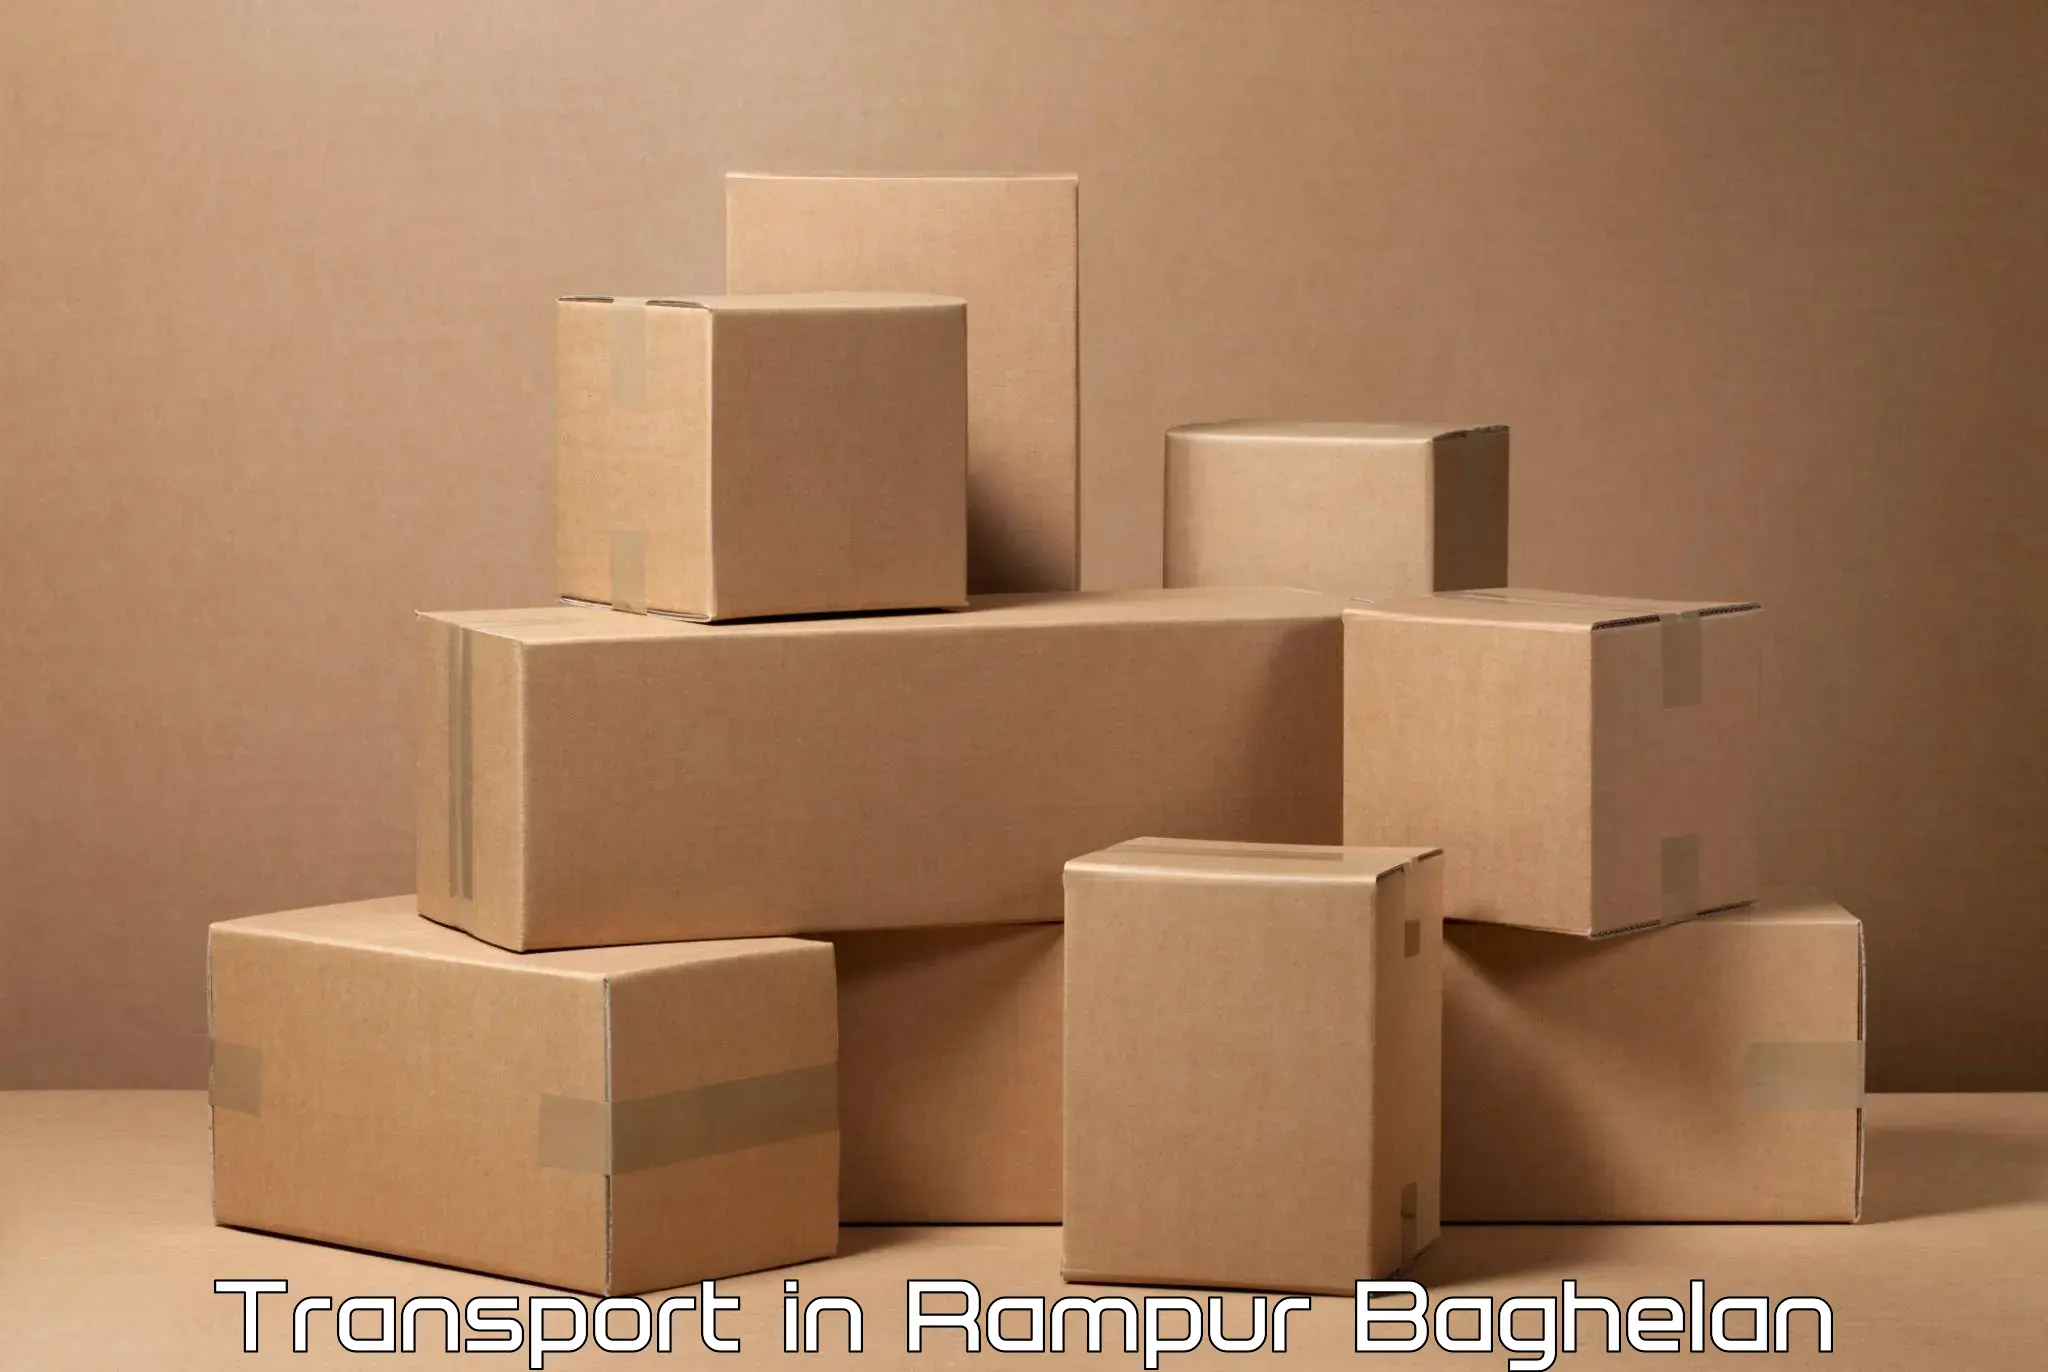 Container transport service in Rampur Baghelan